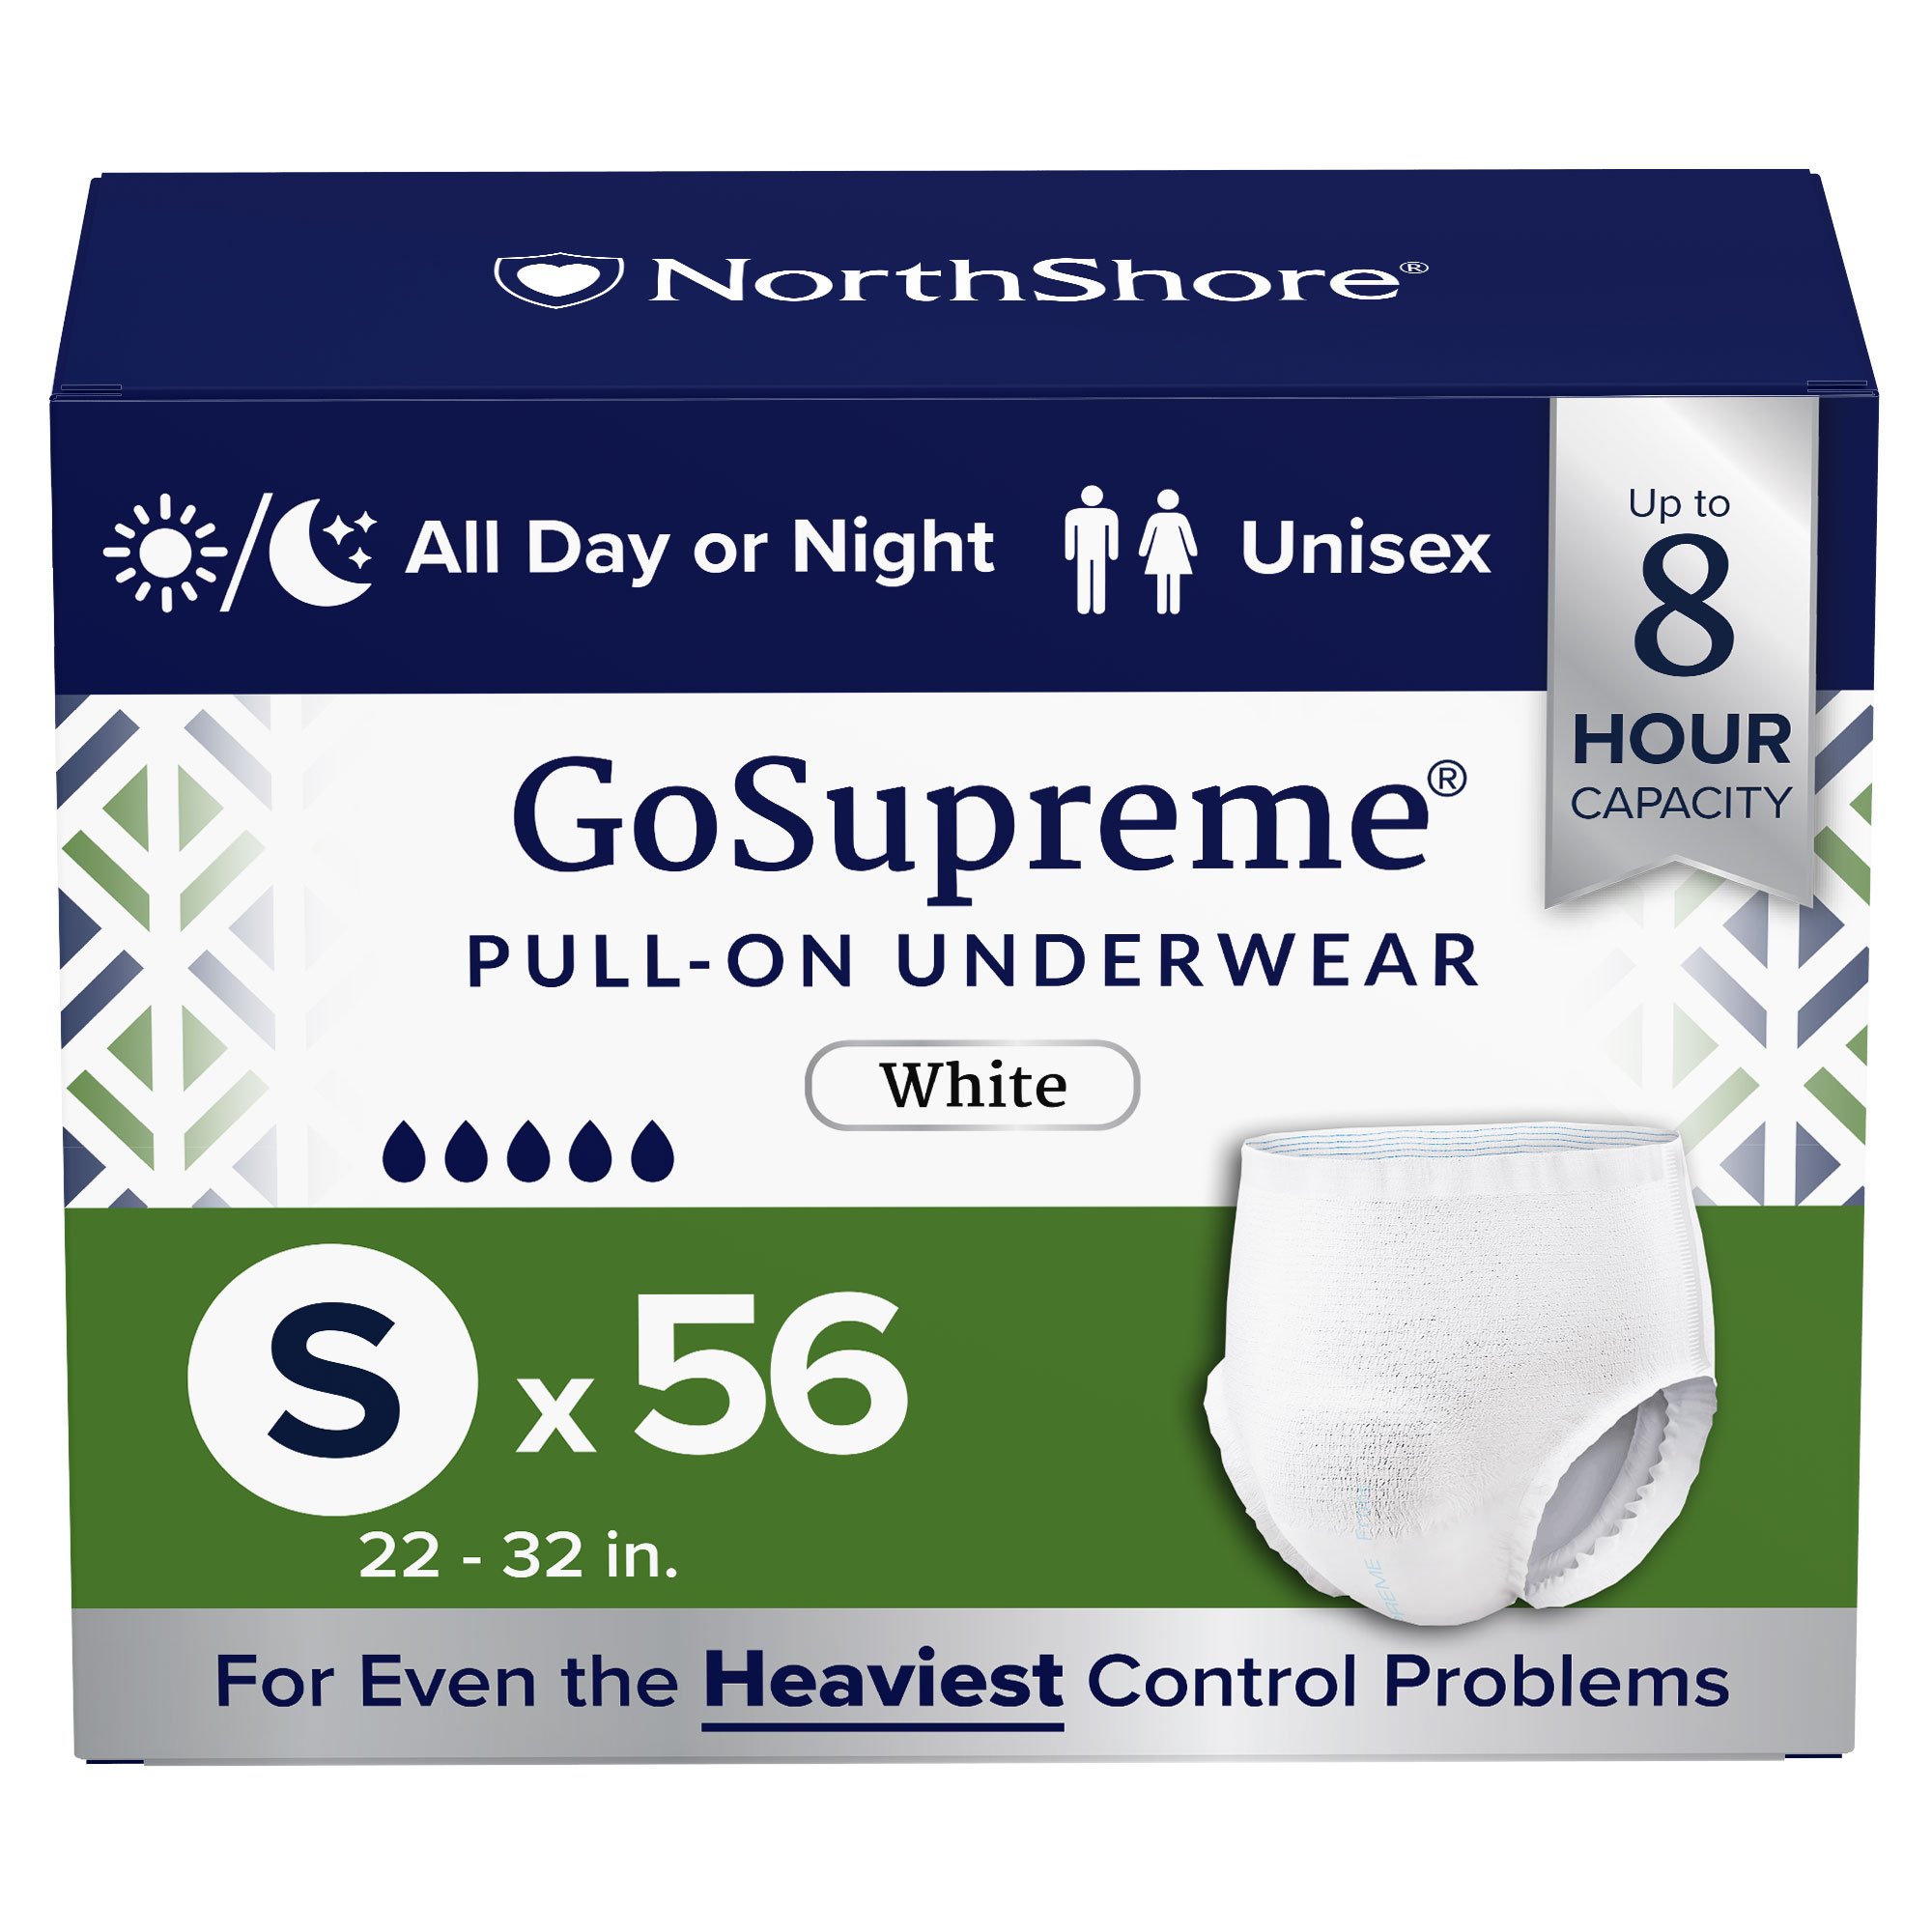 Adult Incontinence Undergarments - Incontinent Care Products - Pull Ups,  Briefs & Diapers